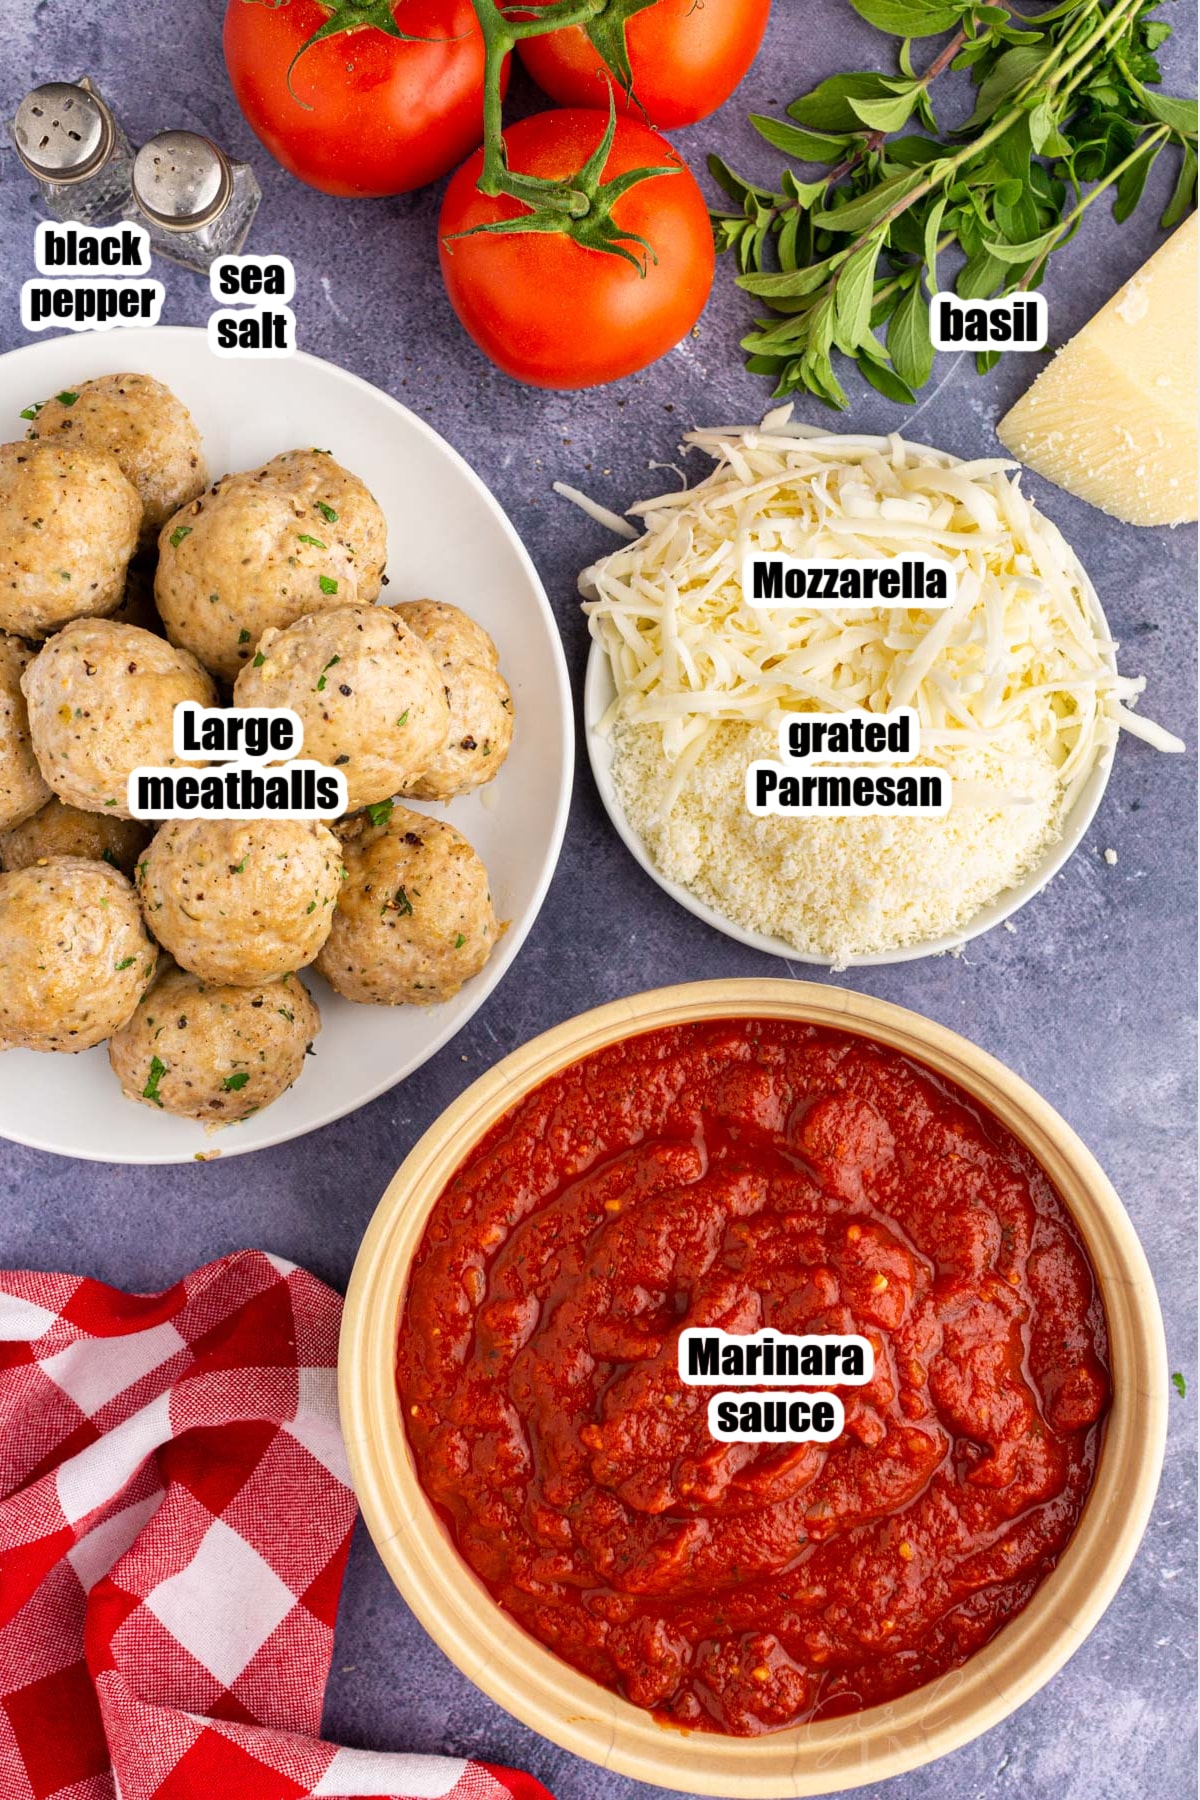 Labeled ingredients for the Meatball Parmesan.